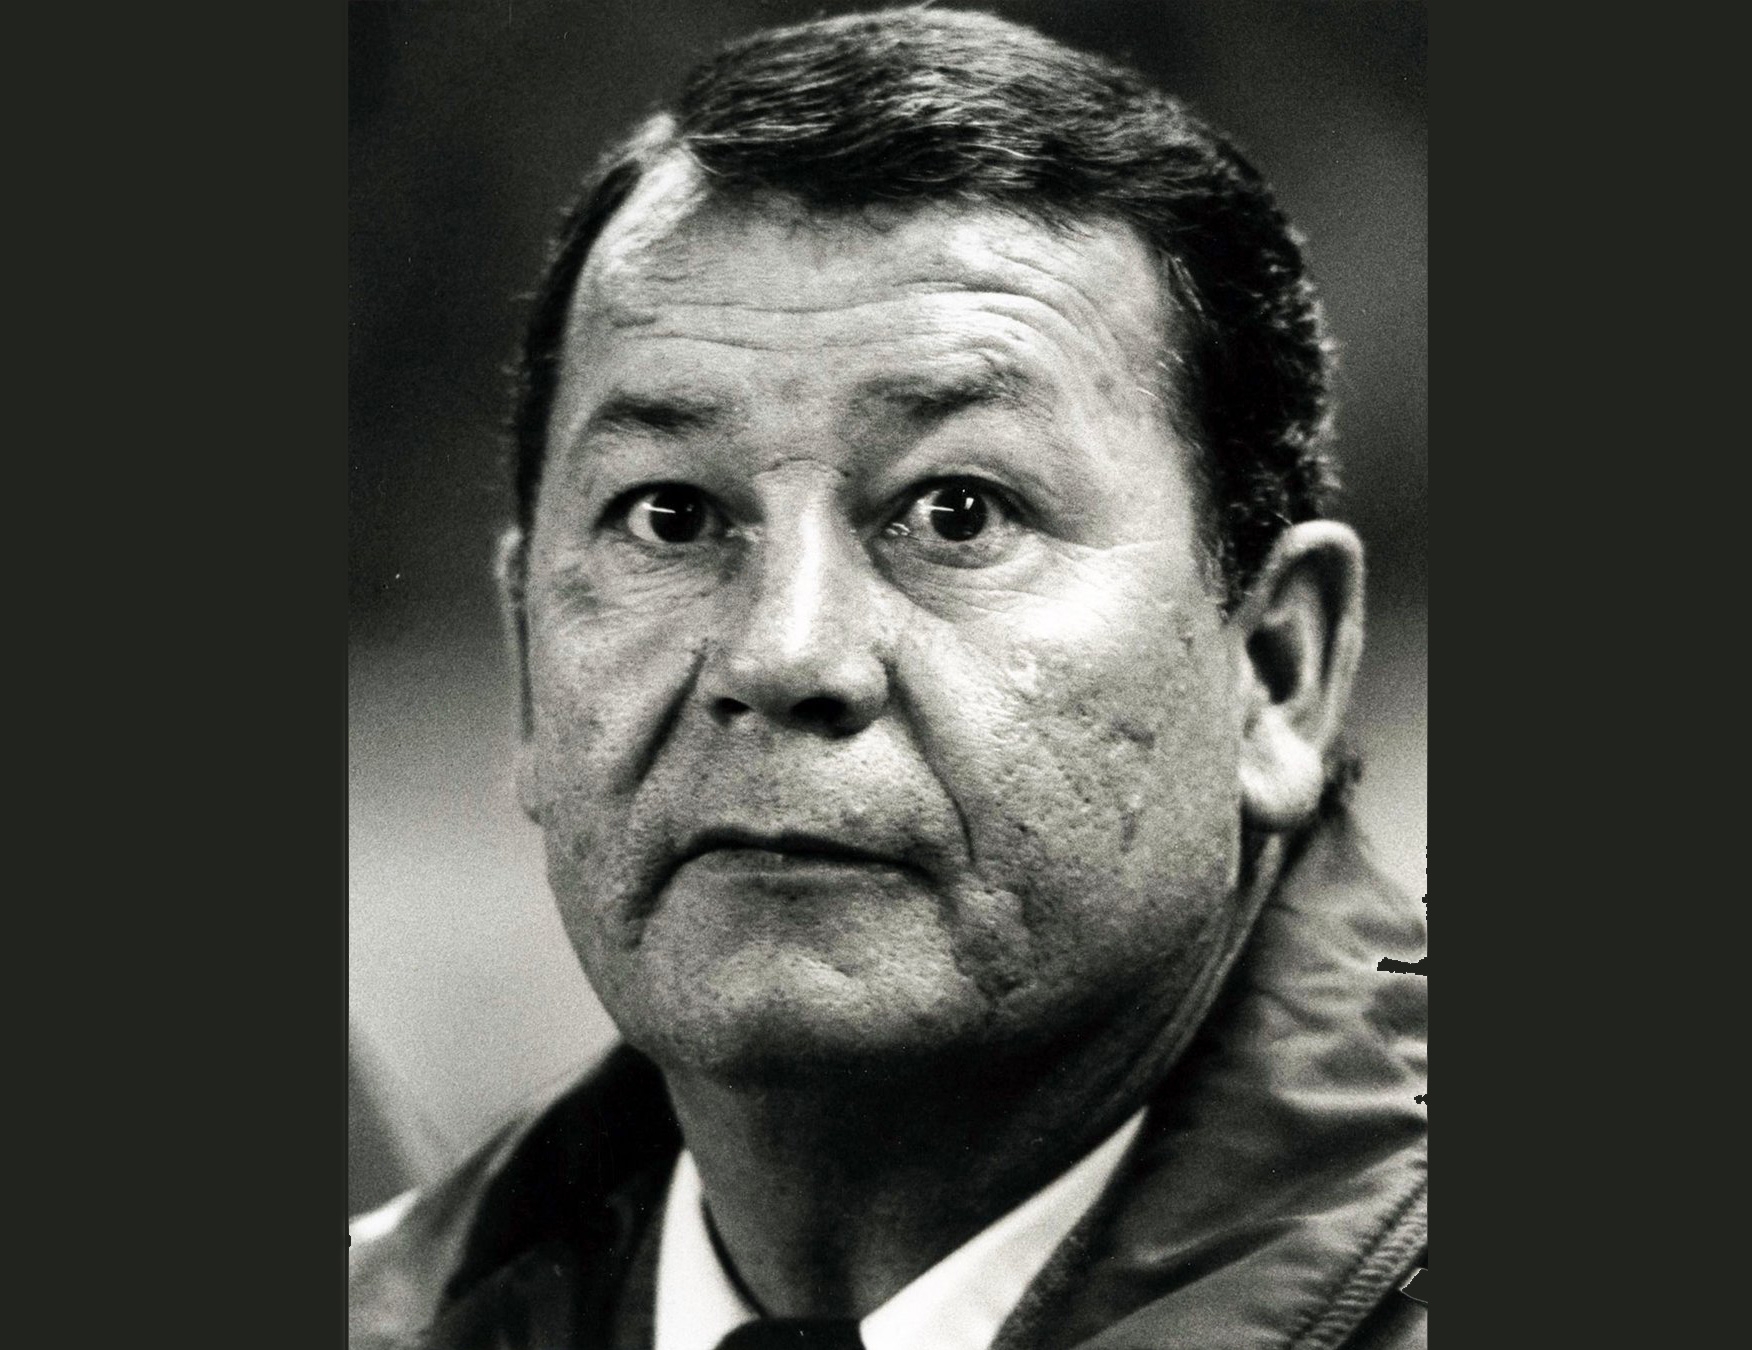 Legendary French footballer Just Fontaine passes away at 89